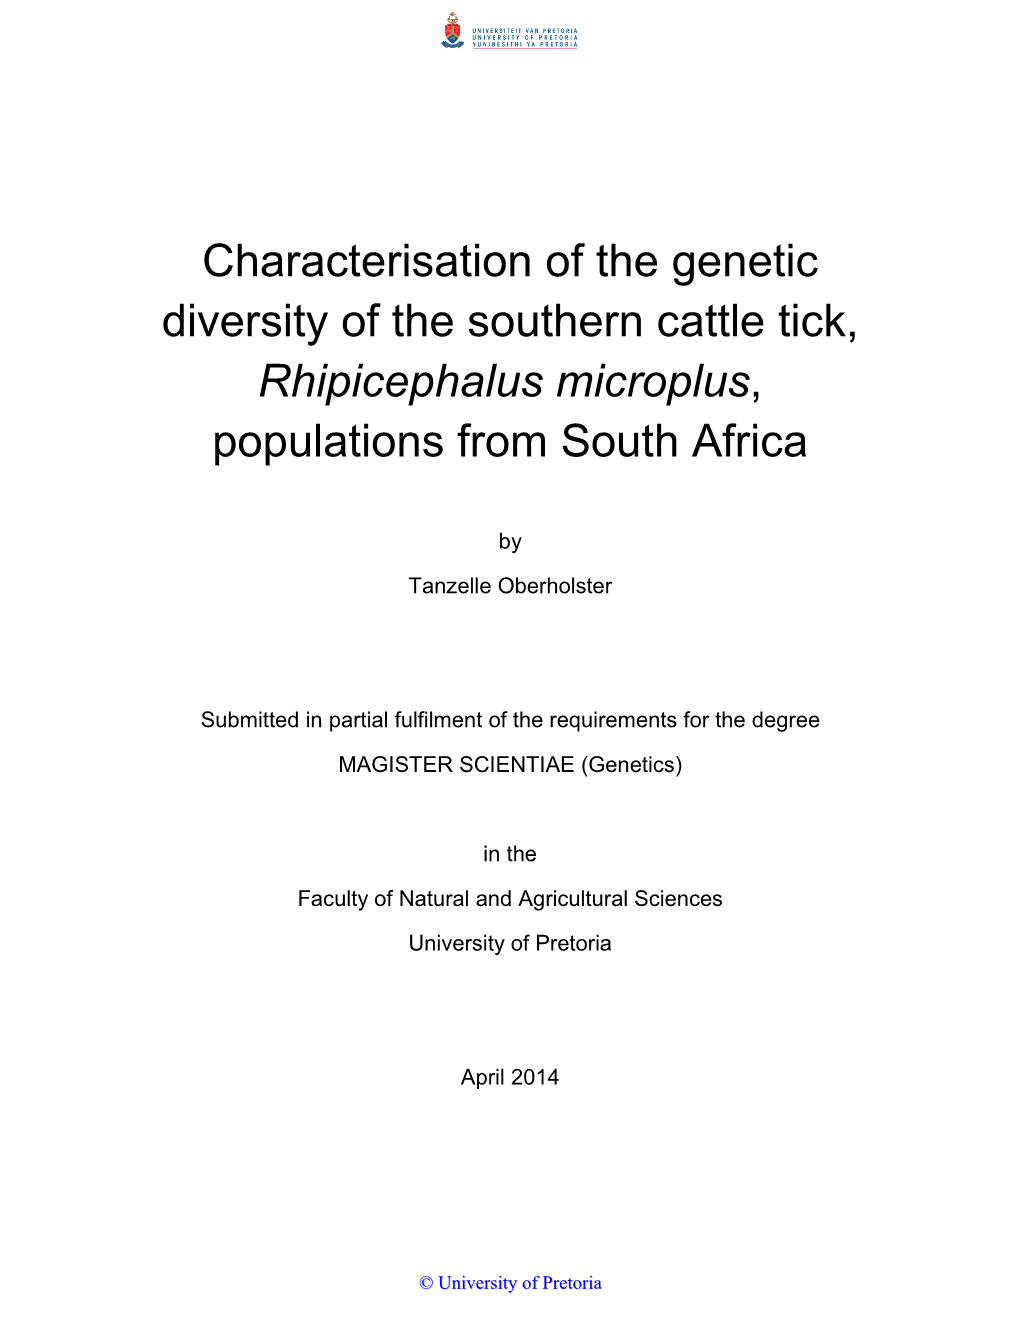 Characterisation of the Genetic Diversity of the Southern Cattle Tick, Rhipicephalus Microplus, Populations from South Africa